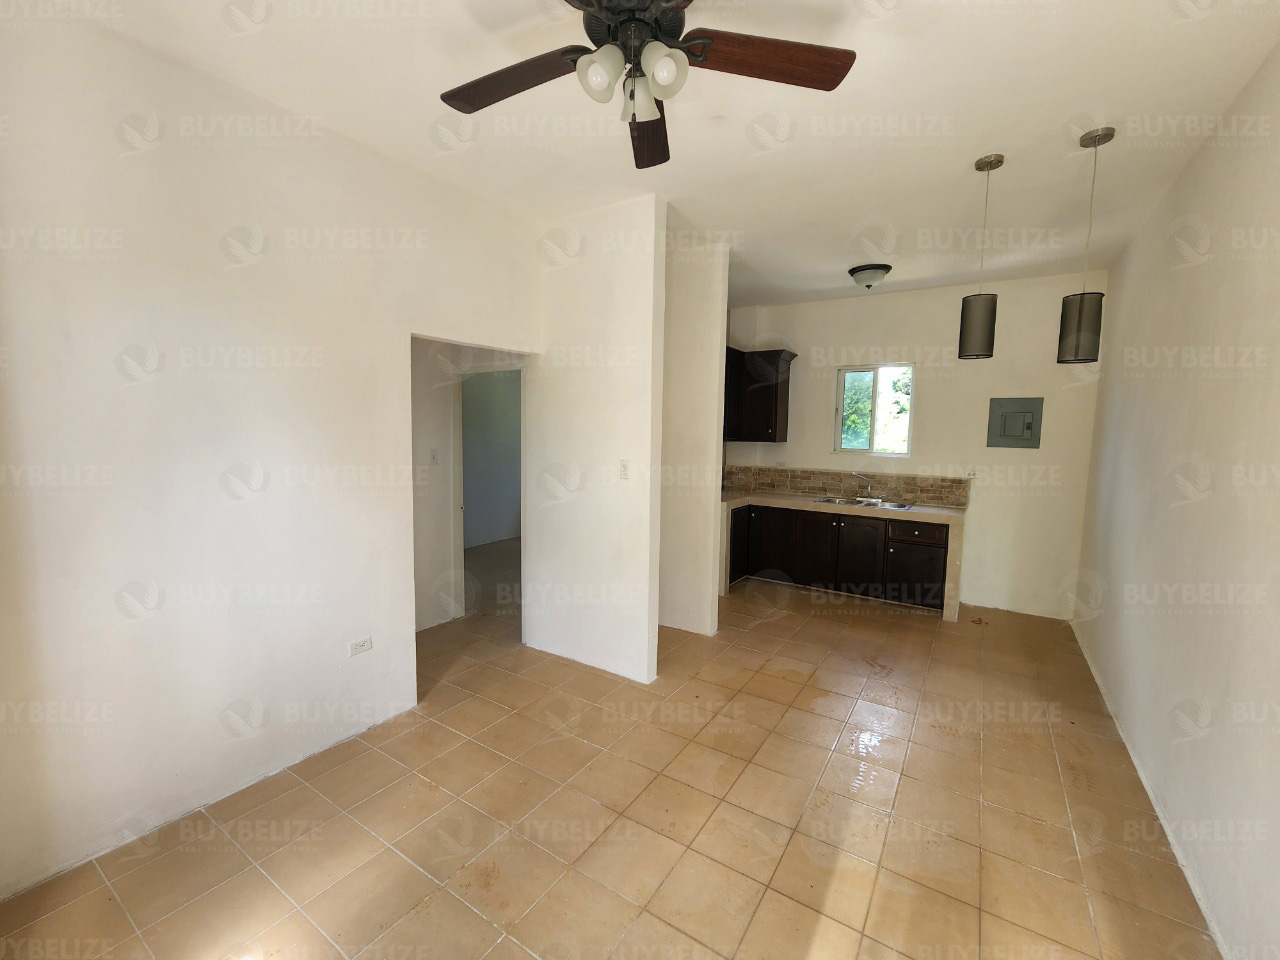 1 Bed | 1 Bath Semi Furnished apartment for rent in Belama Phase 2, Belize City, Belize.